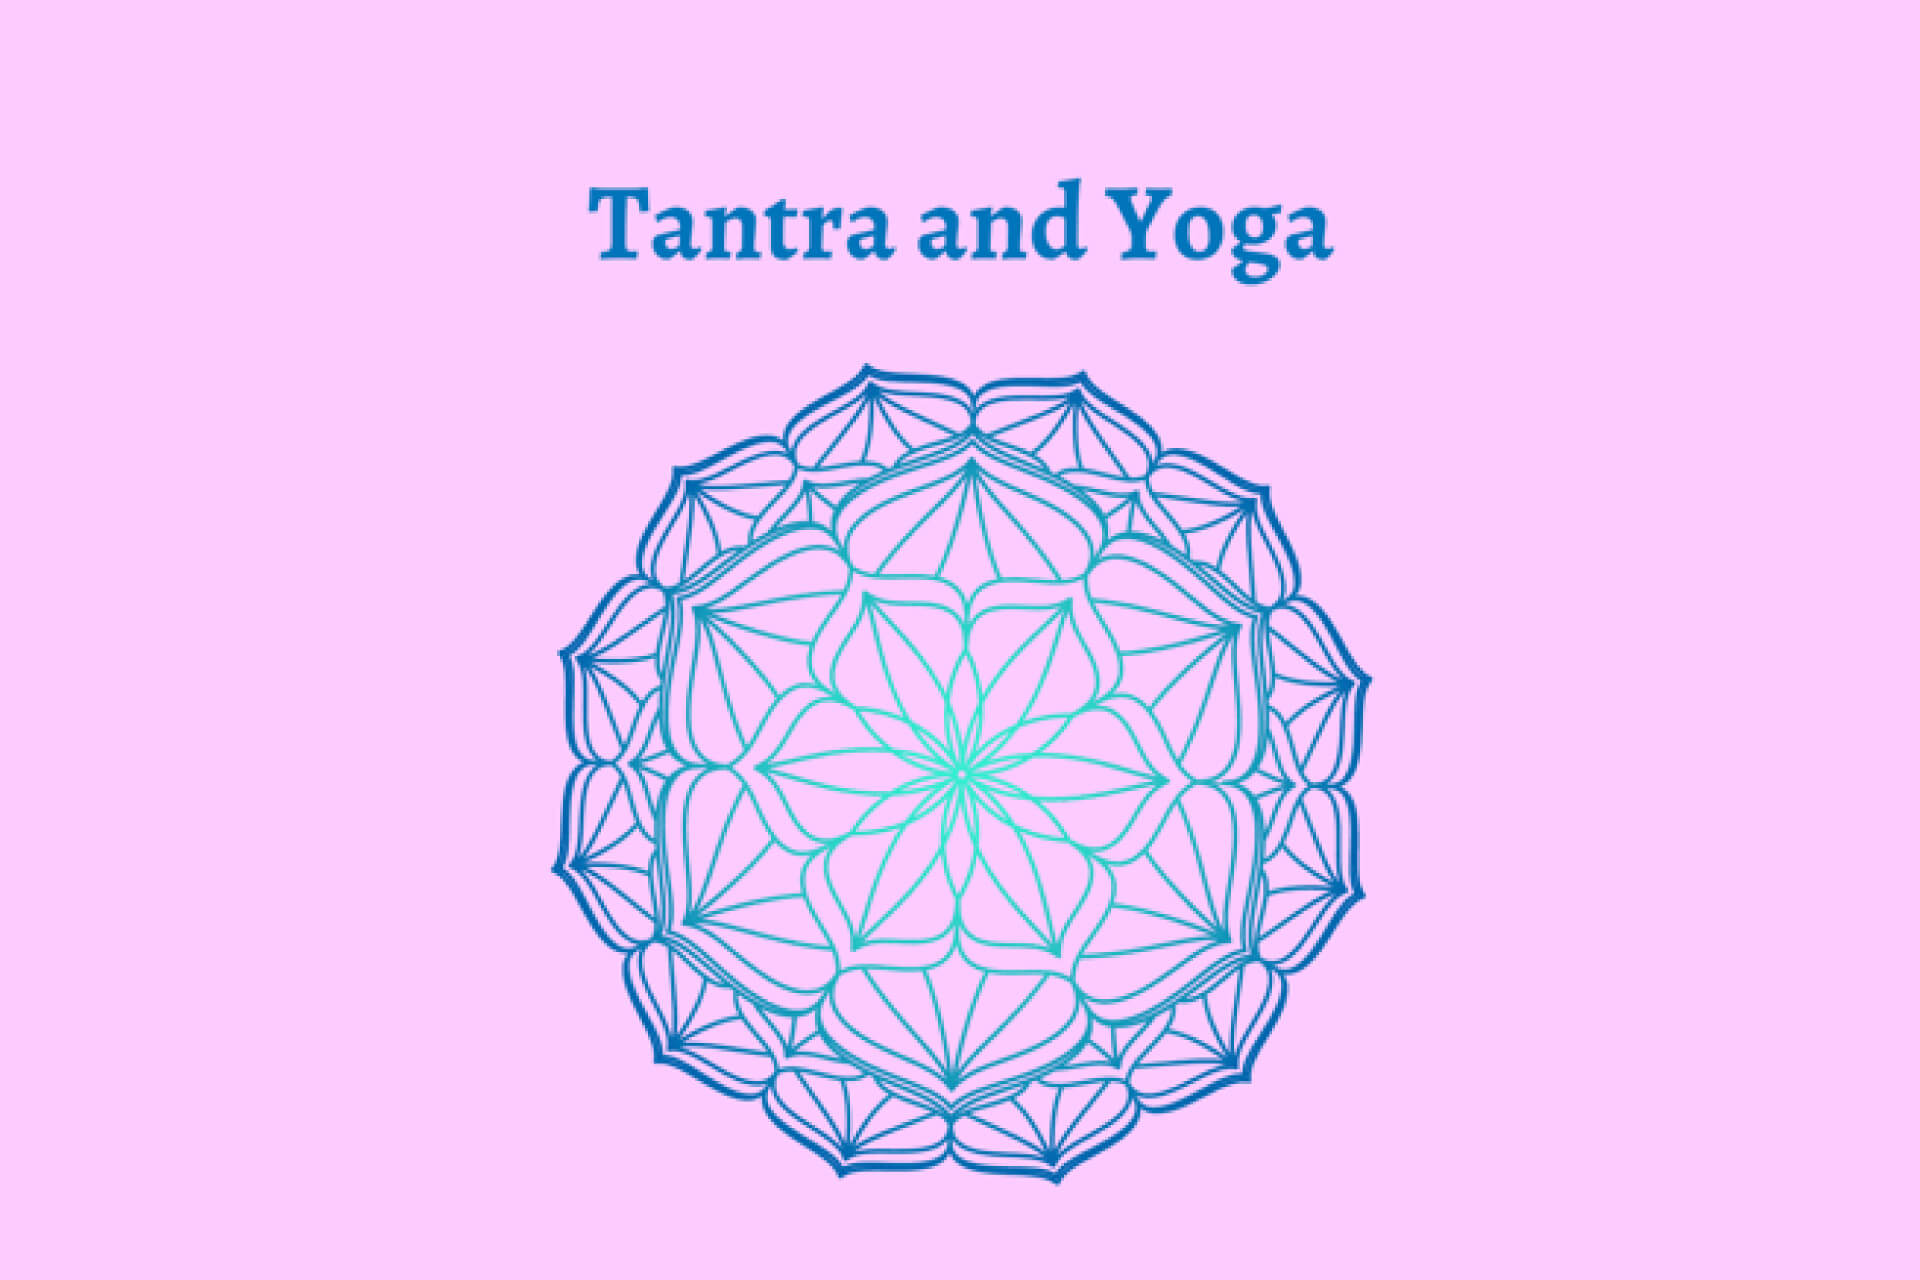 Tantra and Yoga